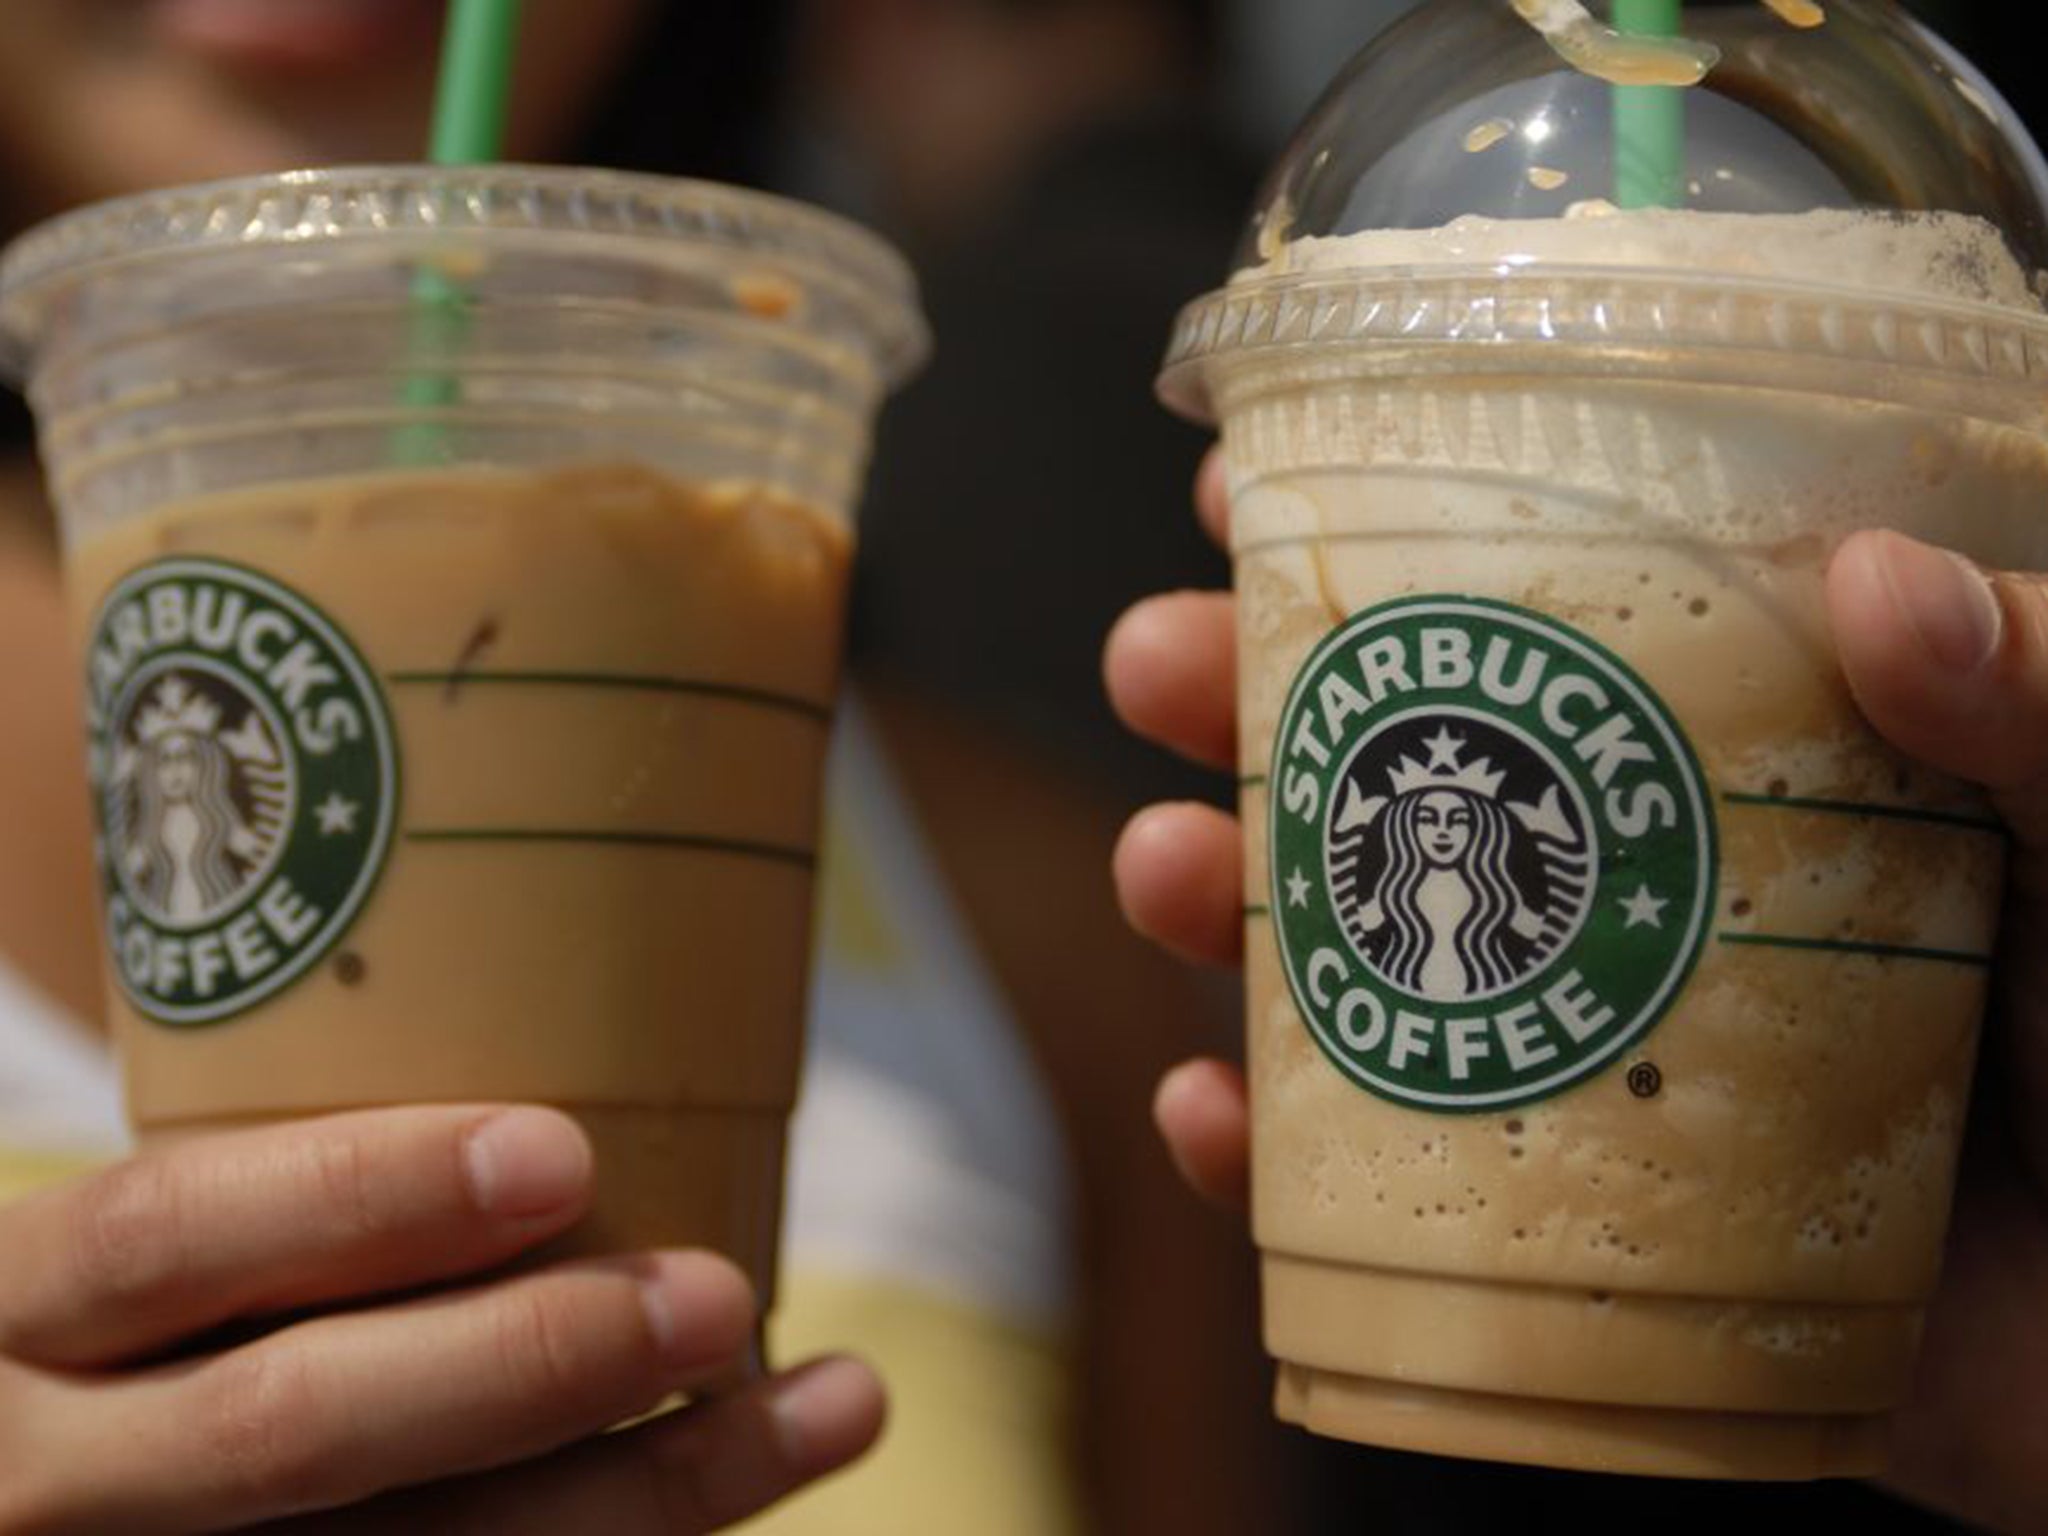 Starbucks Barista Reveals Store's New Automatic Coffee Brewer